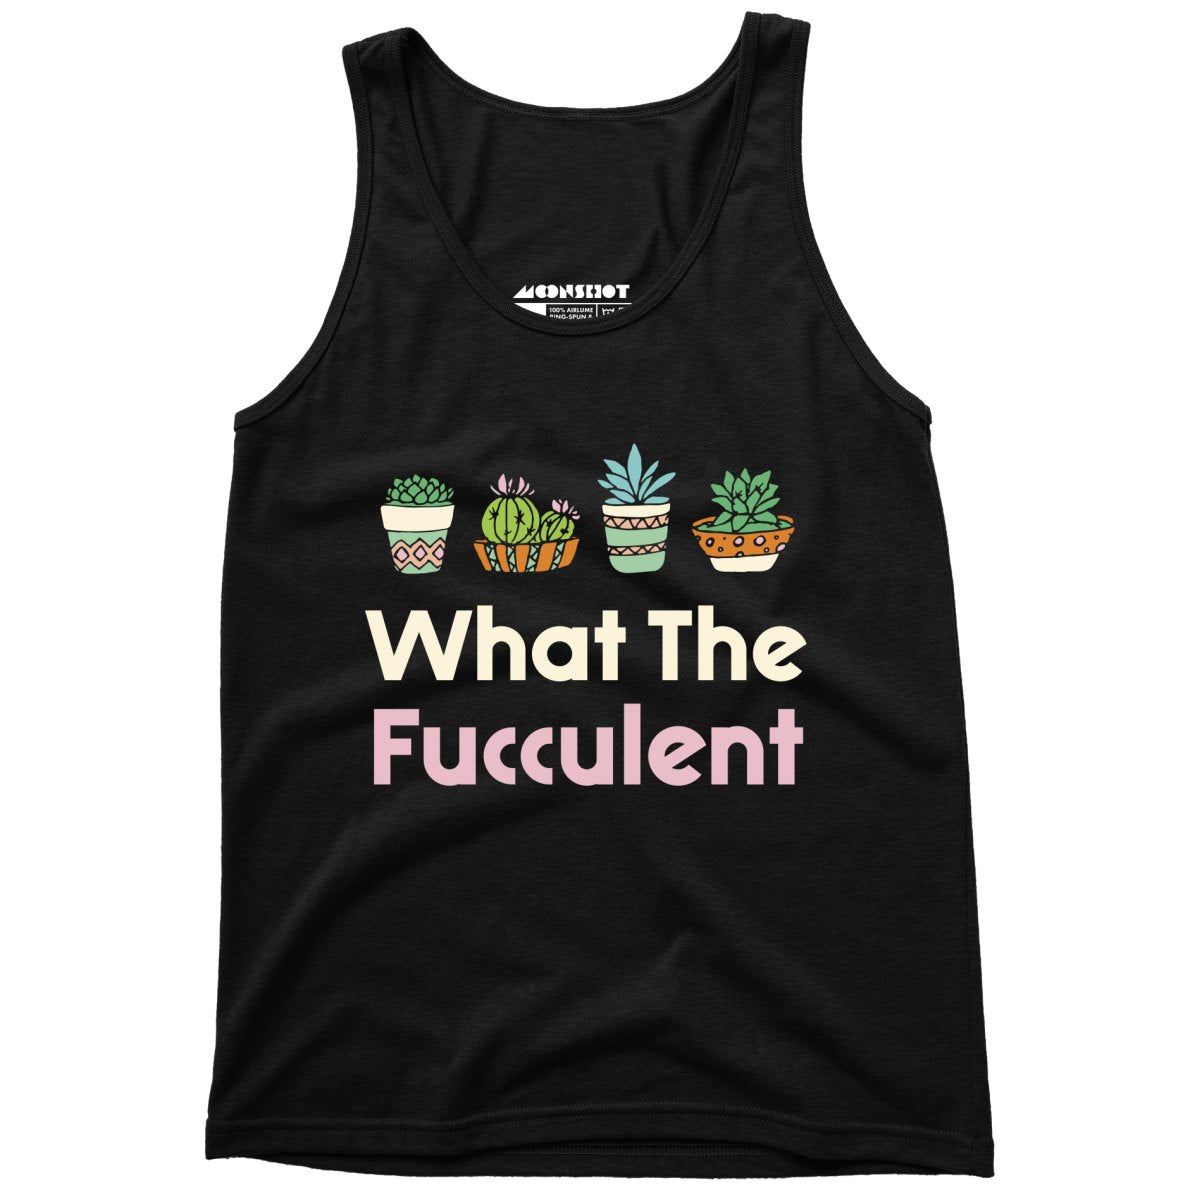 What The Fucculent - Unisex Tank Top